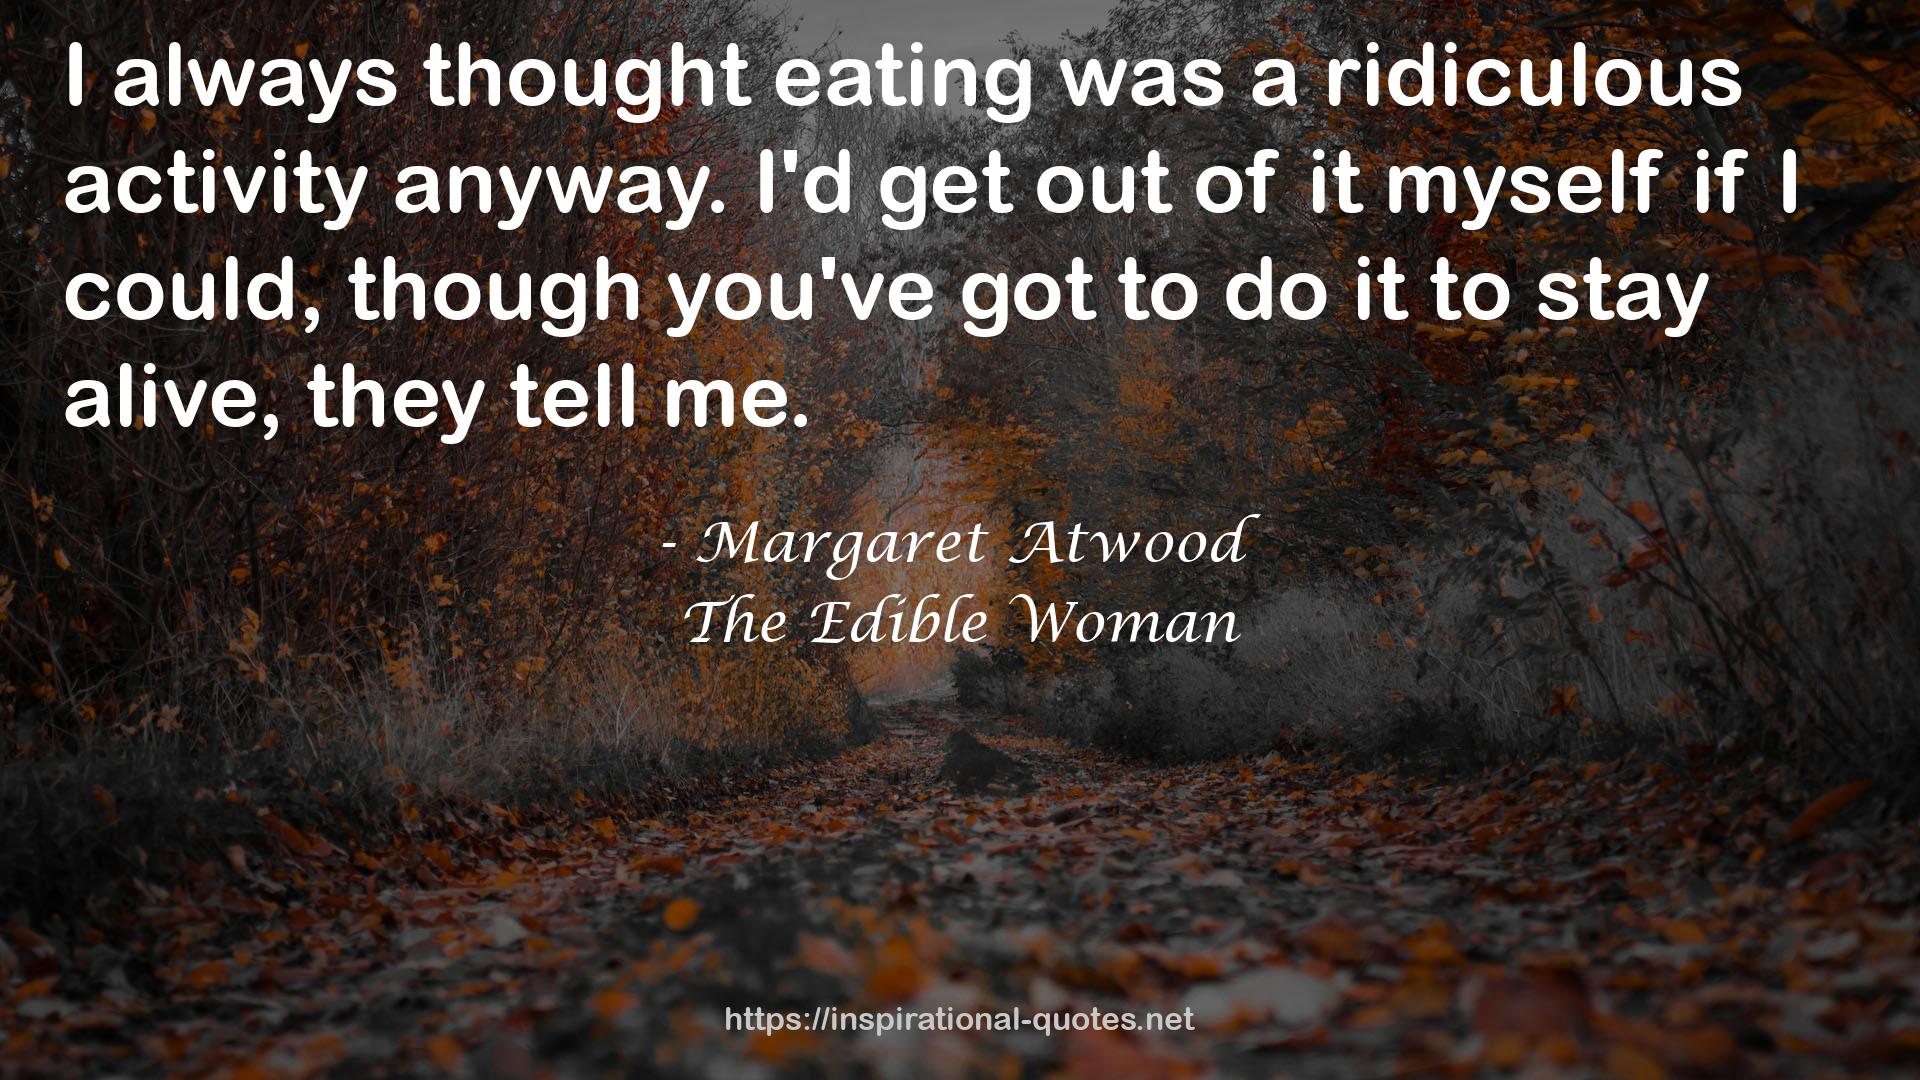 The Edible Woman QUOTES